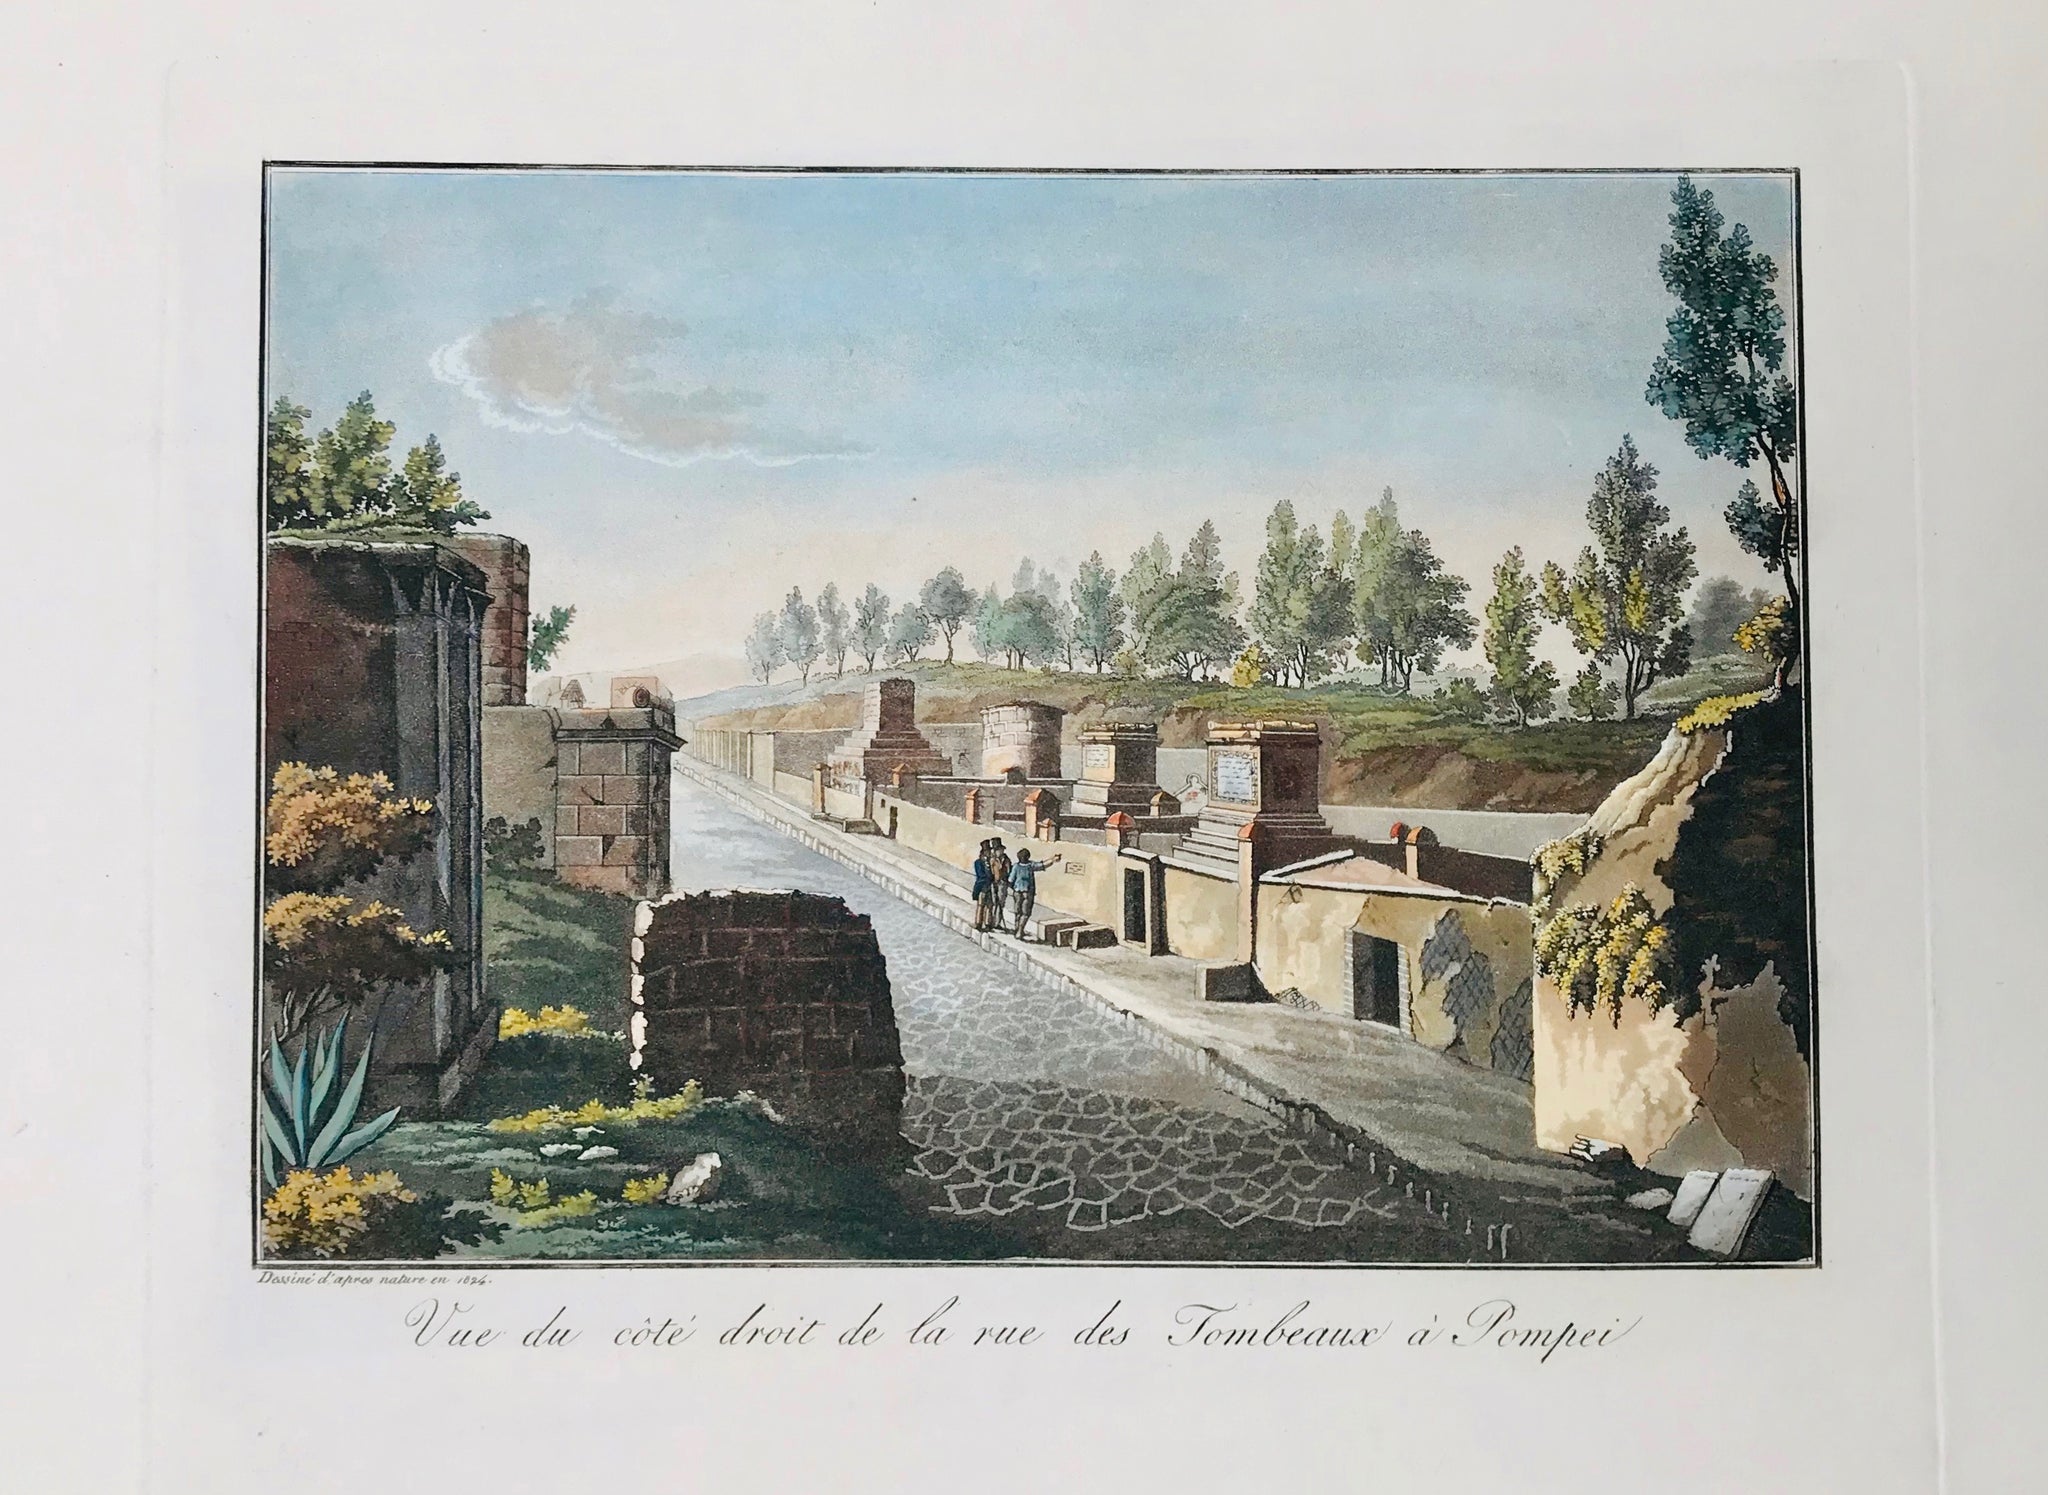 Vue du côte droit de la Rue des Tombeaux à Pompeii  19.3 x 28 cm ( 7.6 x 11 ")    Aquatints engraved by Paul Fumagalli from 1821-1825  These prints with their velvety aquatint appearance were made to delight our hearts. They portrait, like no others, the elegance of architecture and the luxurious lifestyle of the citizens of the ancient city - until the nearby Vesuvius put an end to it all in a devestating rain of volcanic ashes.